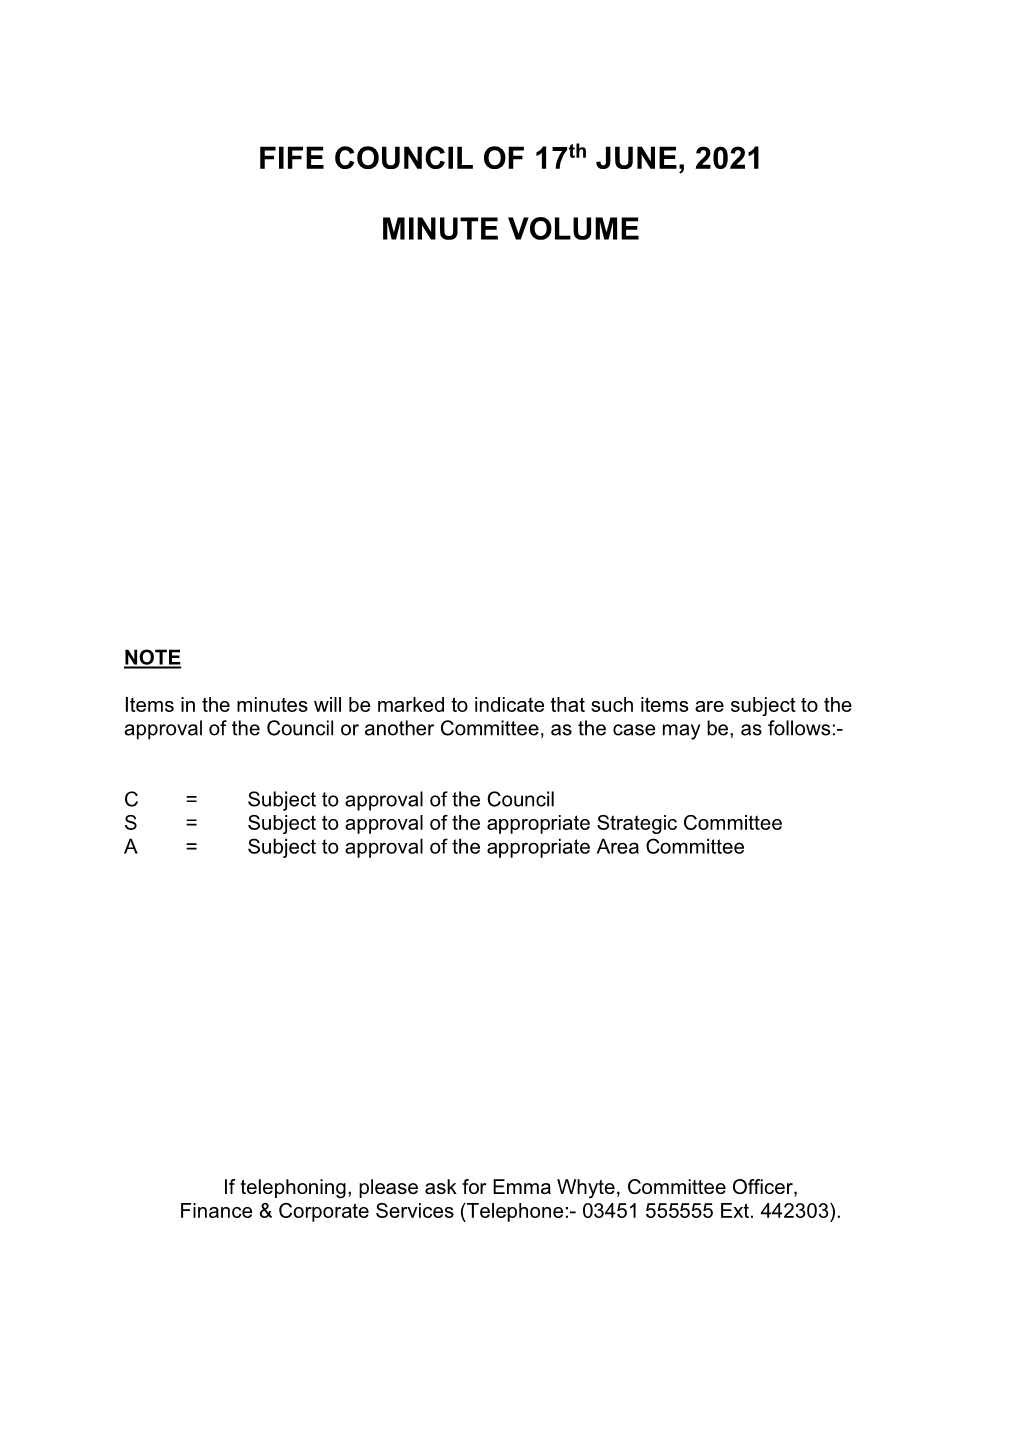 FIFE COUNCIL of 17Th JUNE, 2021 MINUTE VOLUME